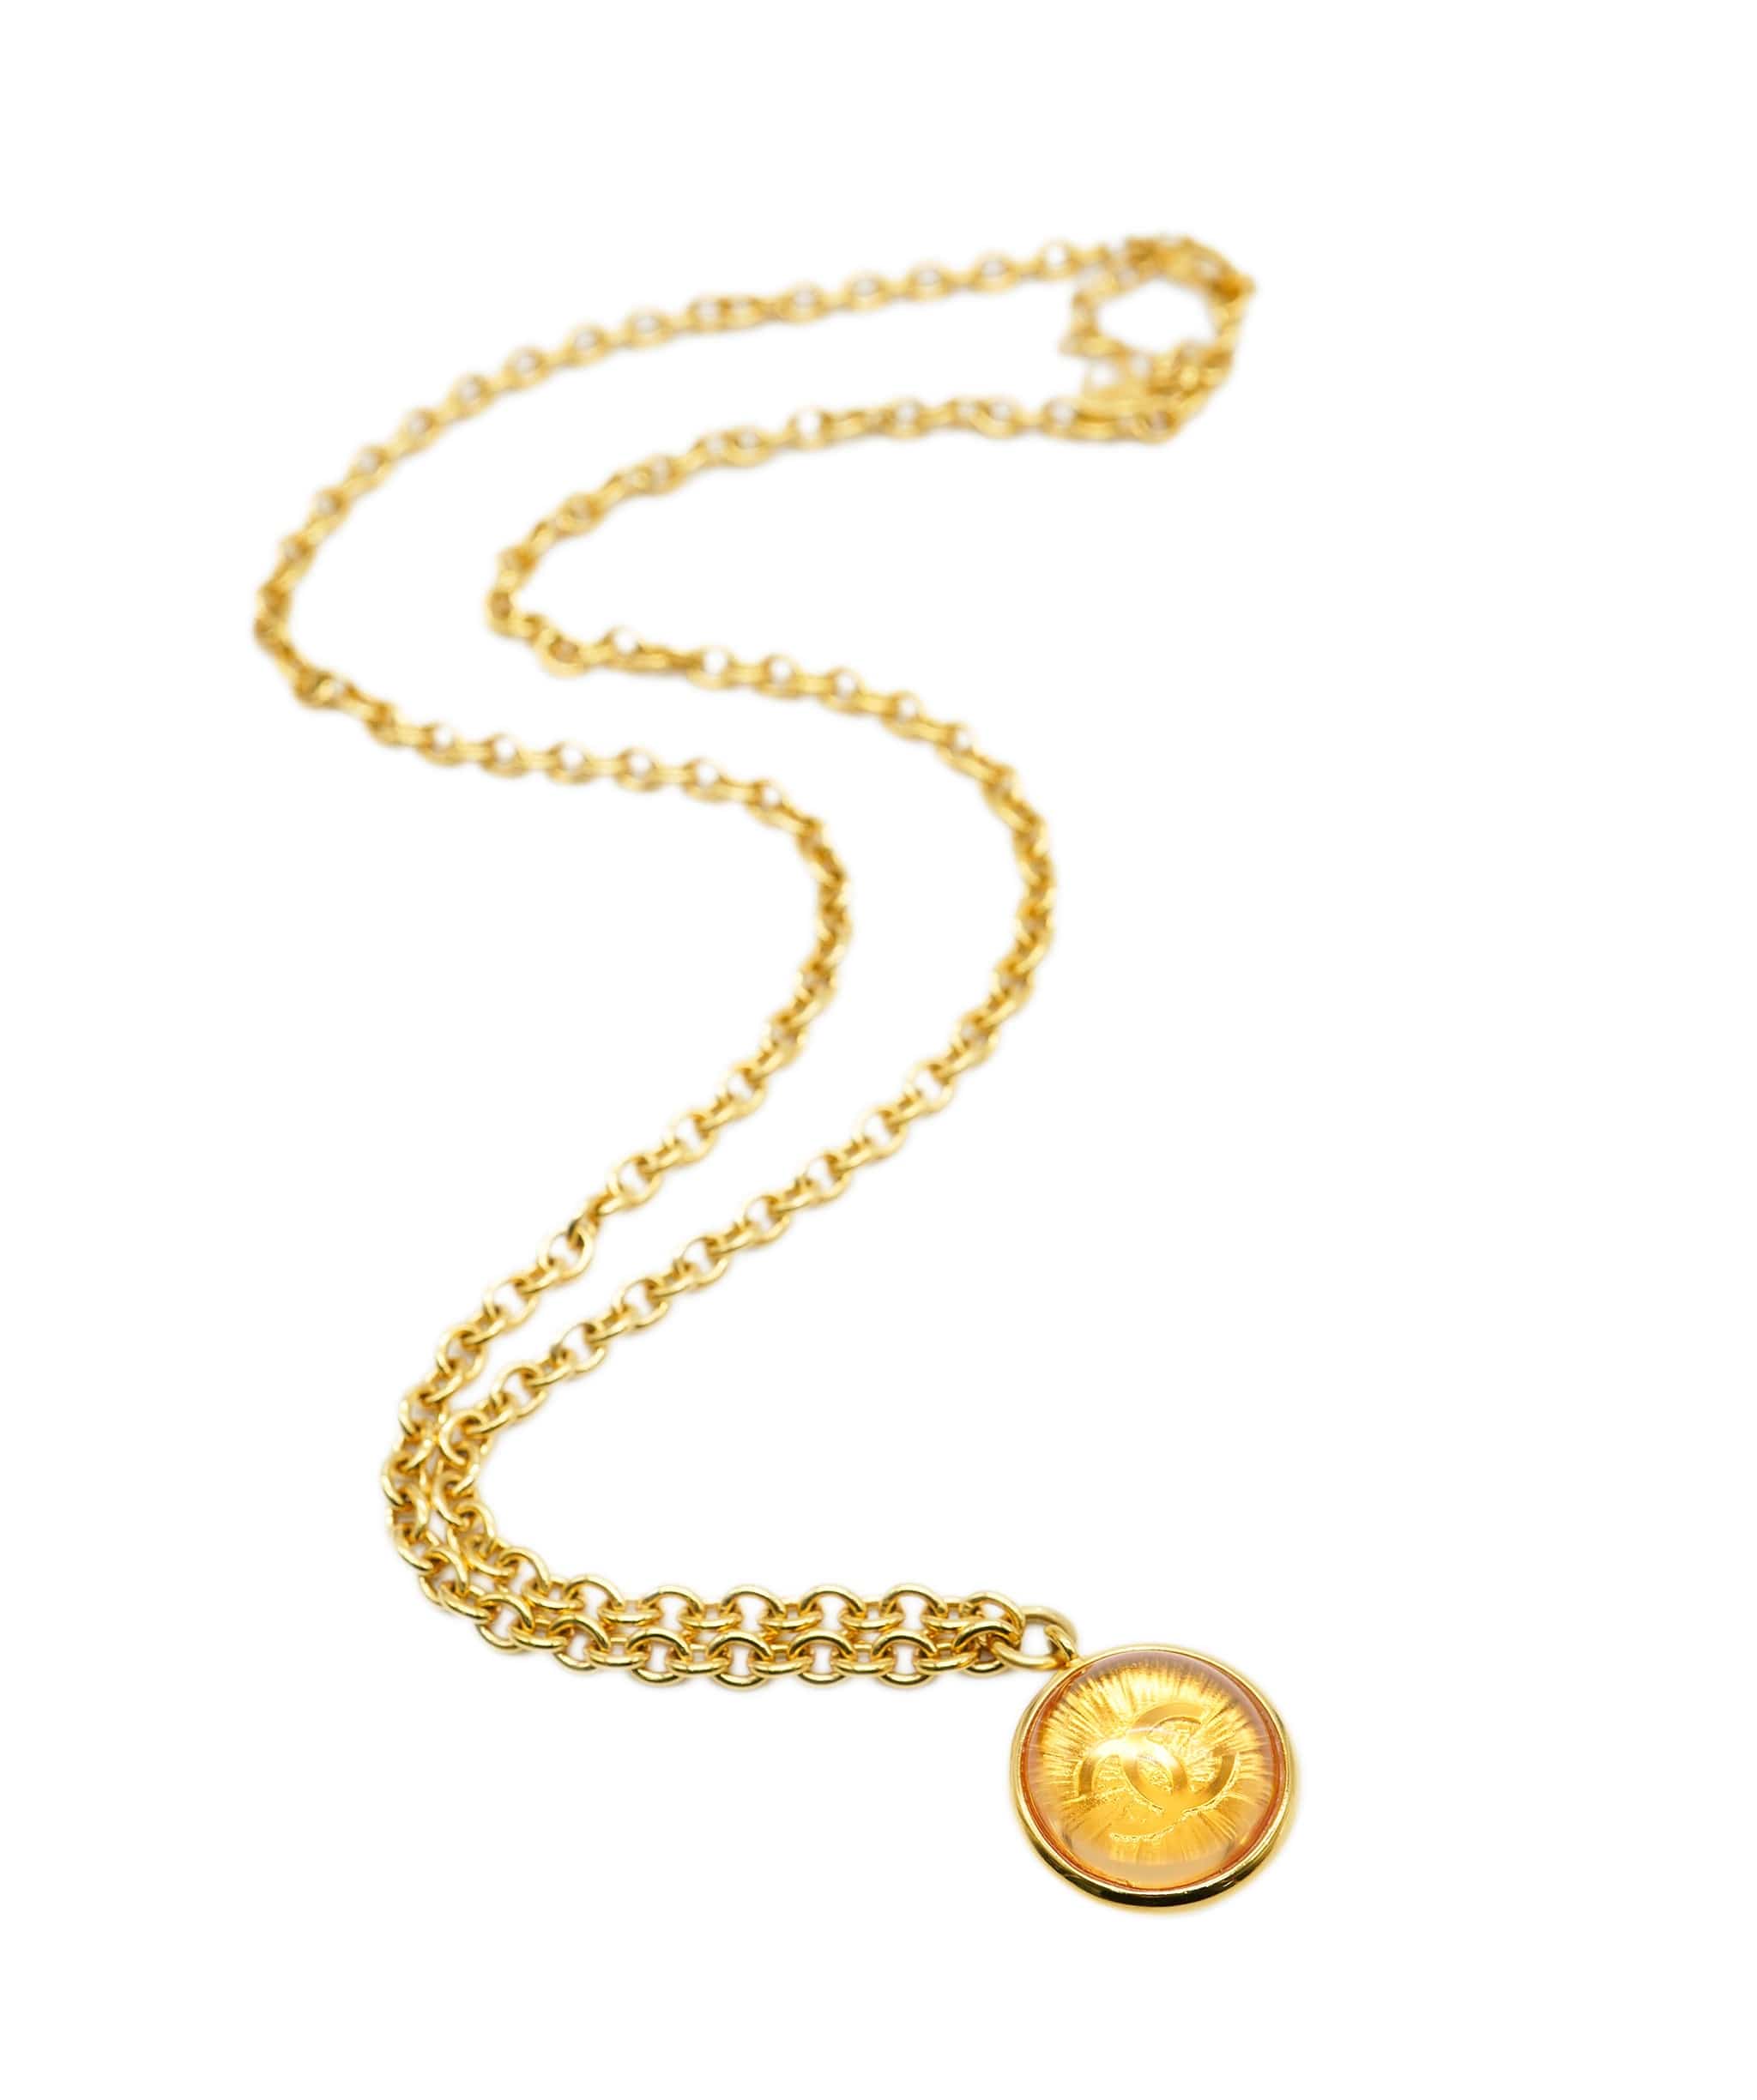 Chanel Chanel Gold Medalion Necklace Brand New ALC1262